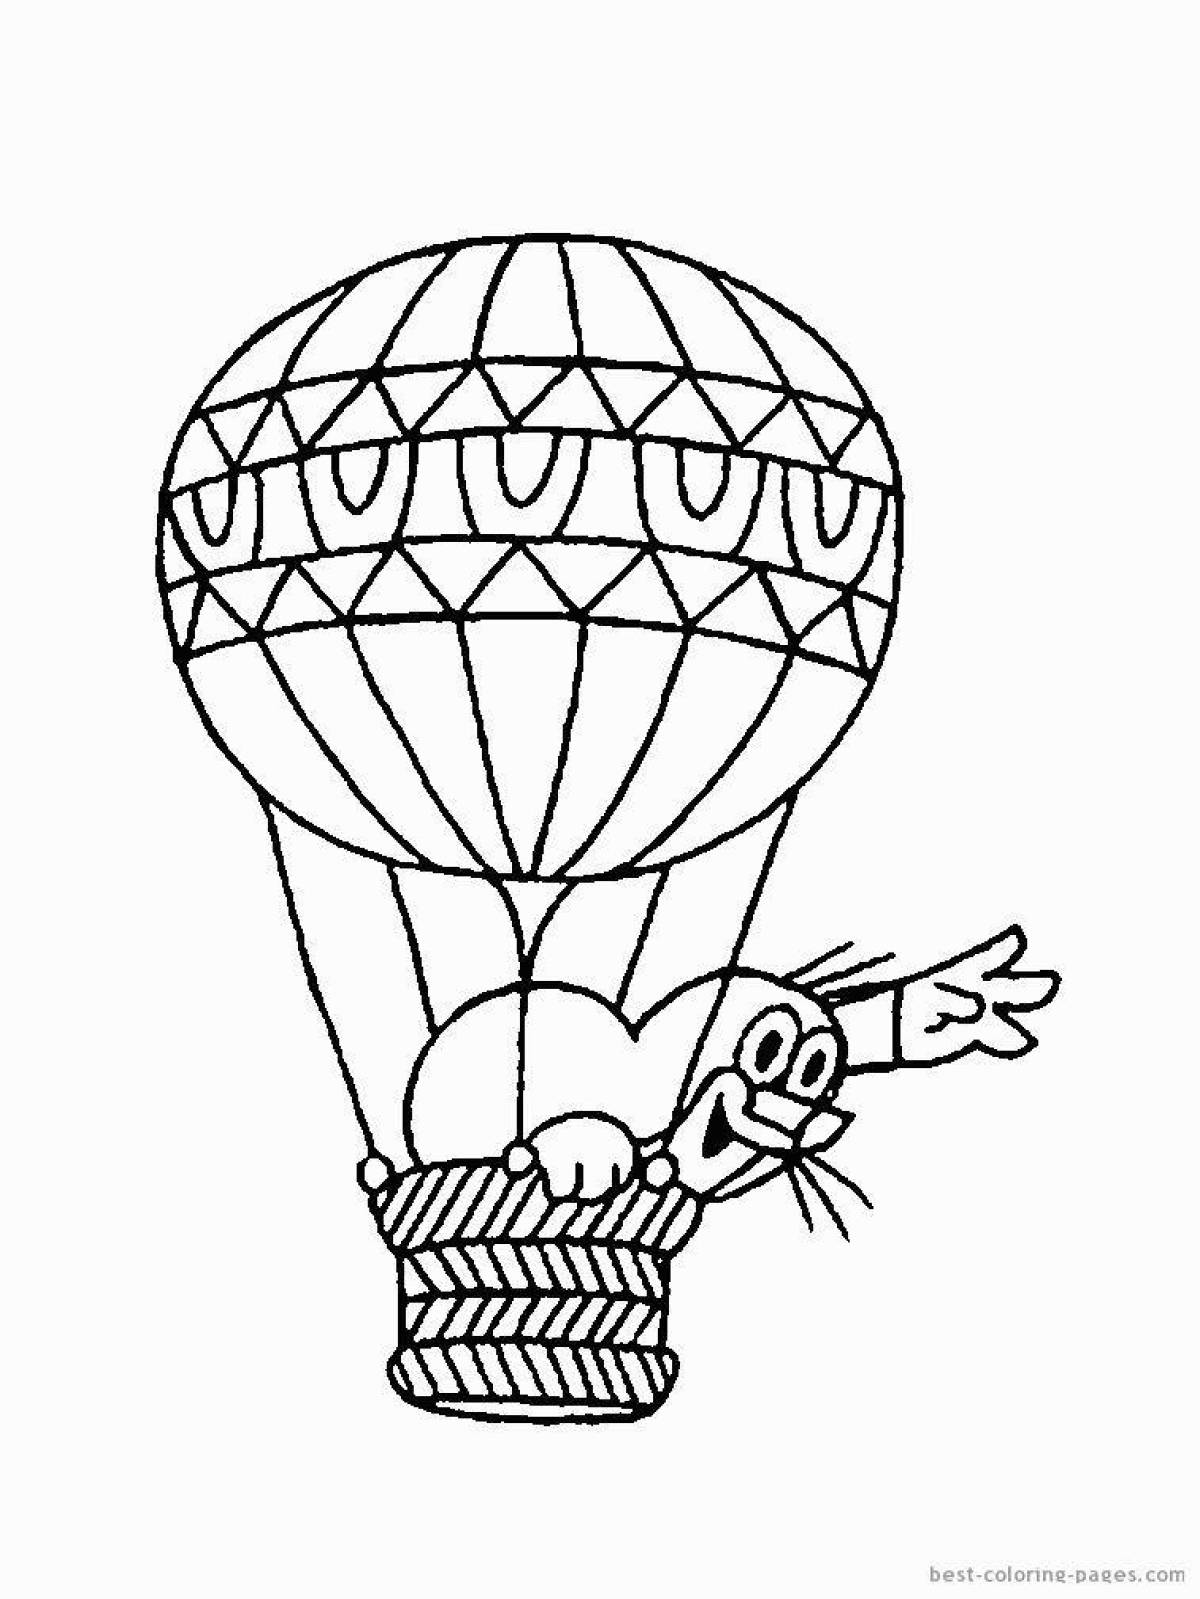 Coloring page balloon with basket